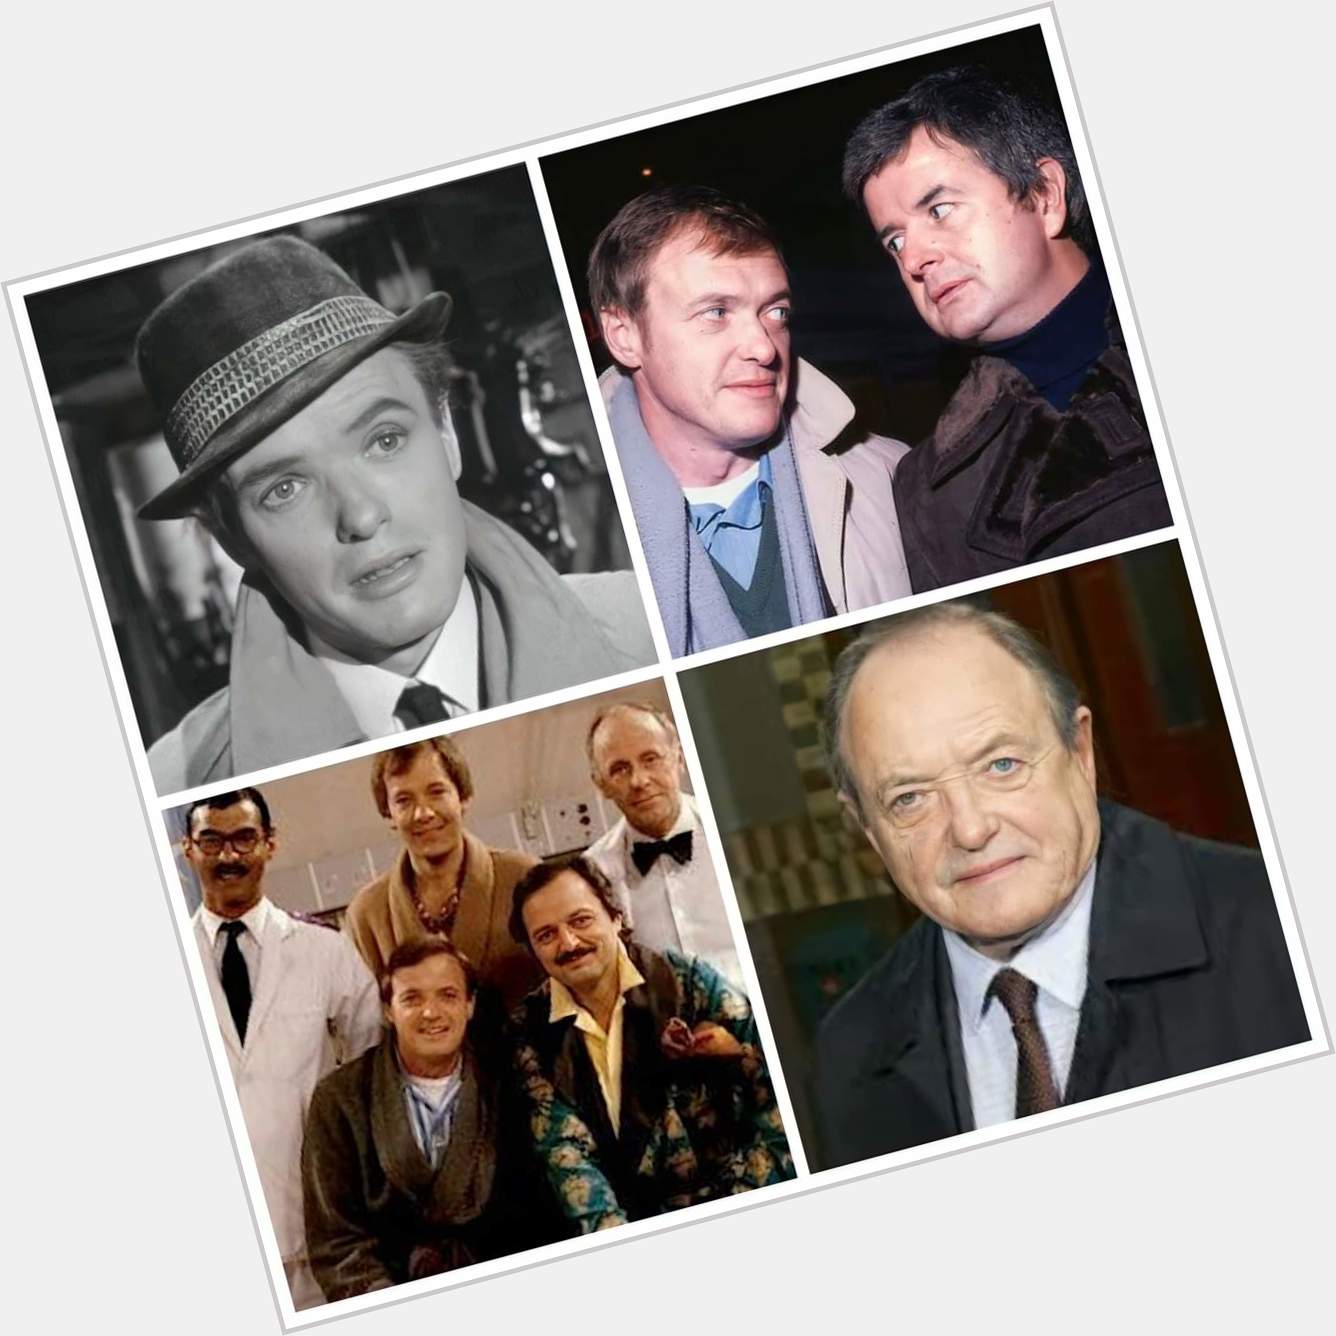 James Bolam is 86 today, Happy Birthday James  